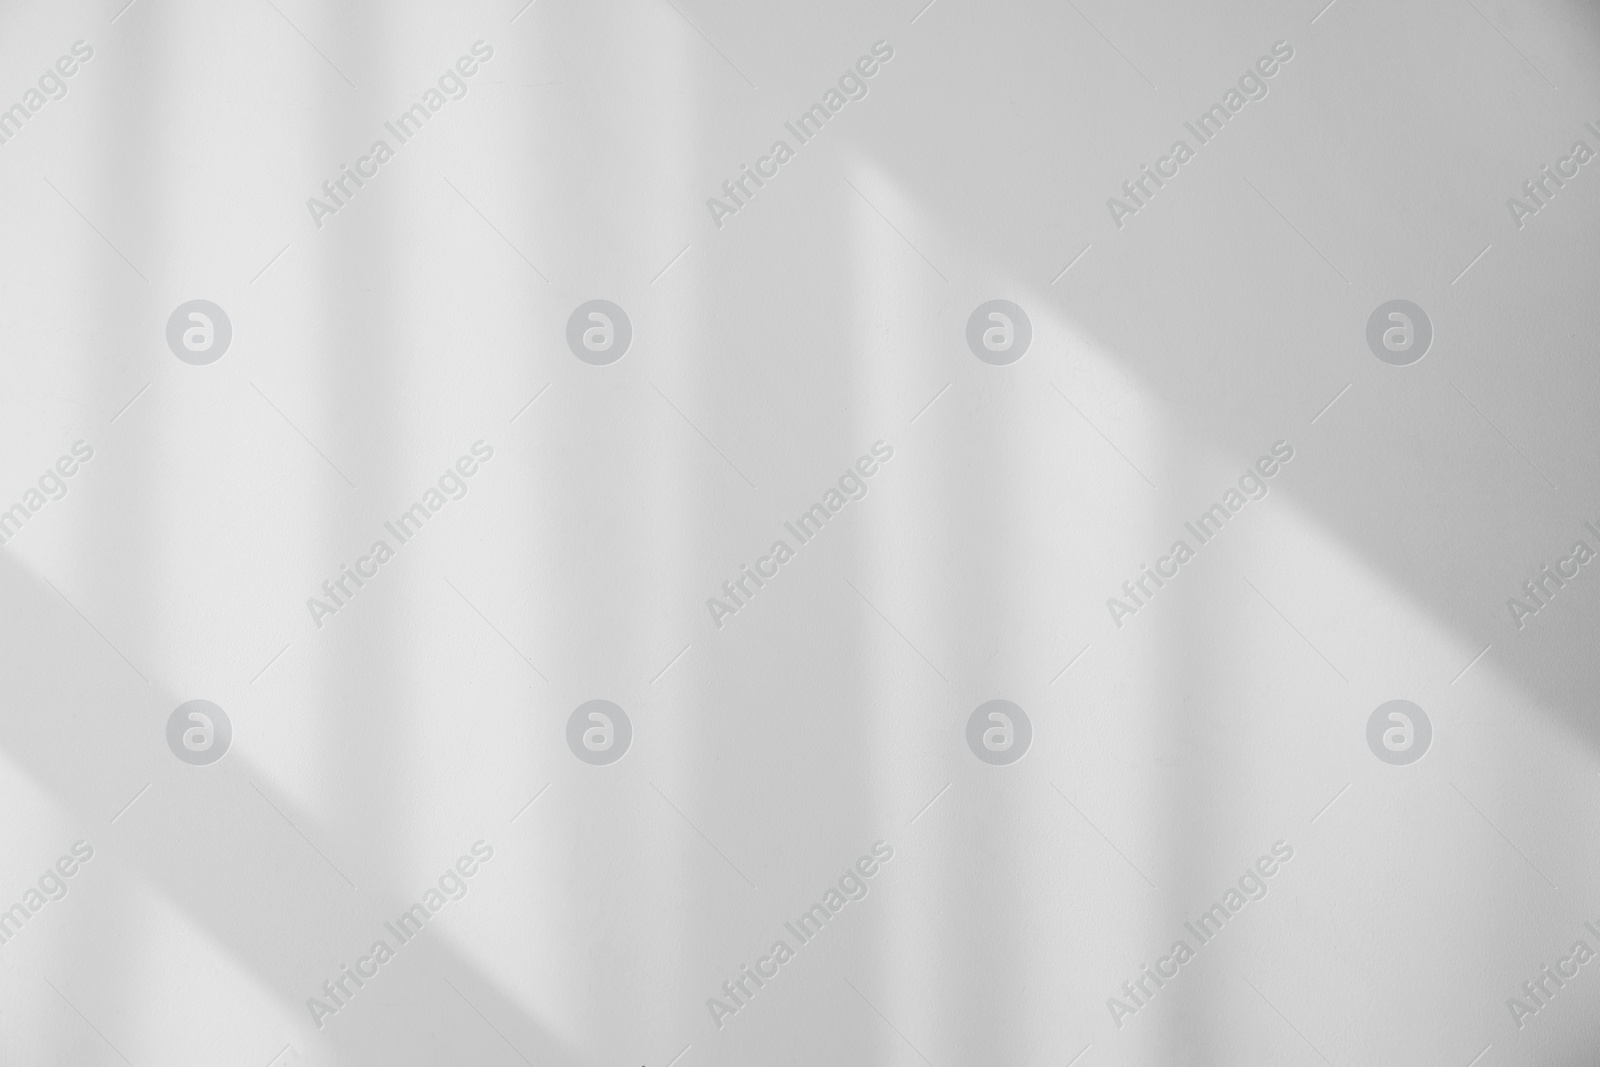 Photo of Shadow from window and curtains on white wall indoors